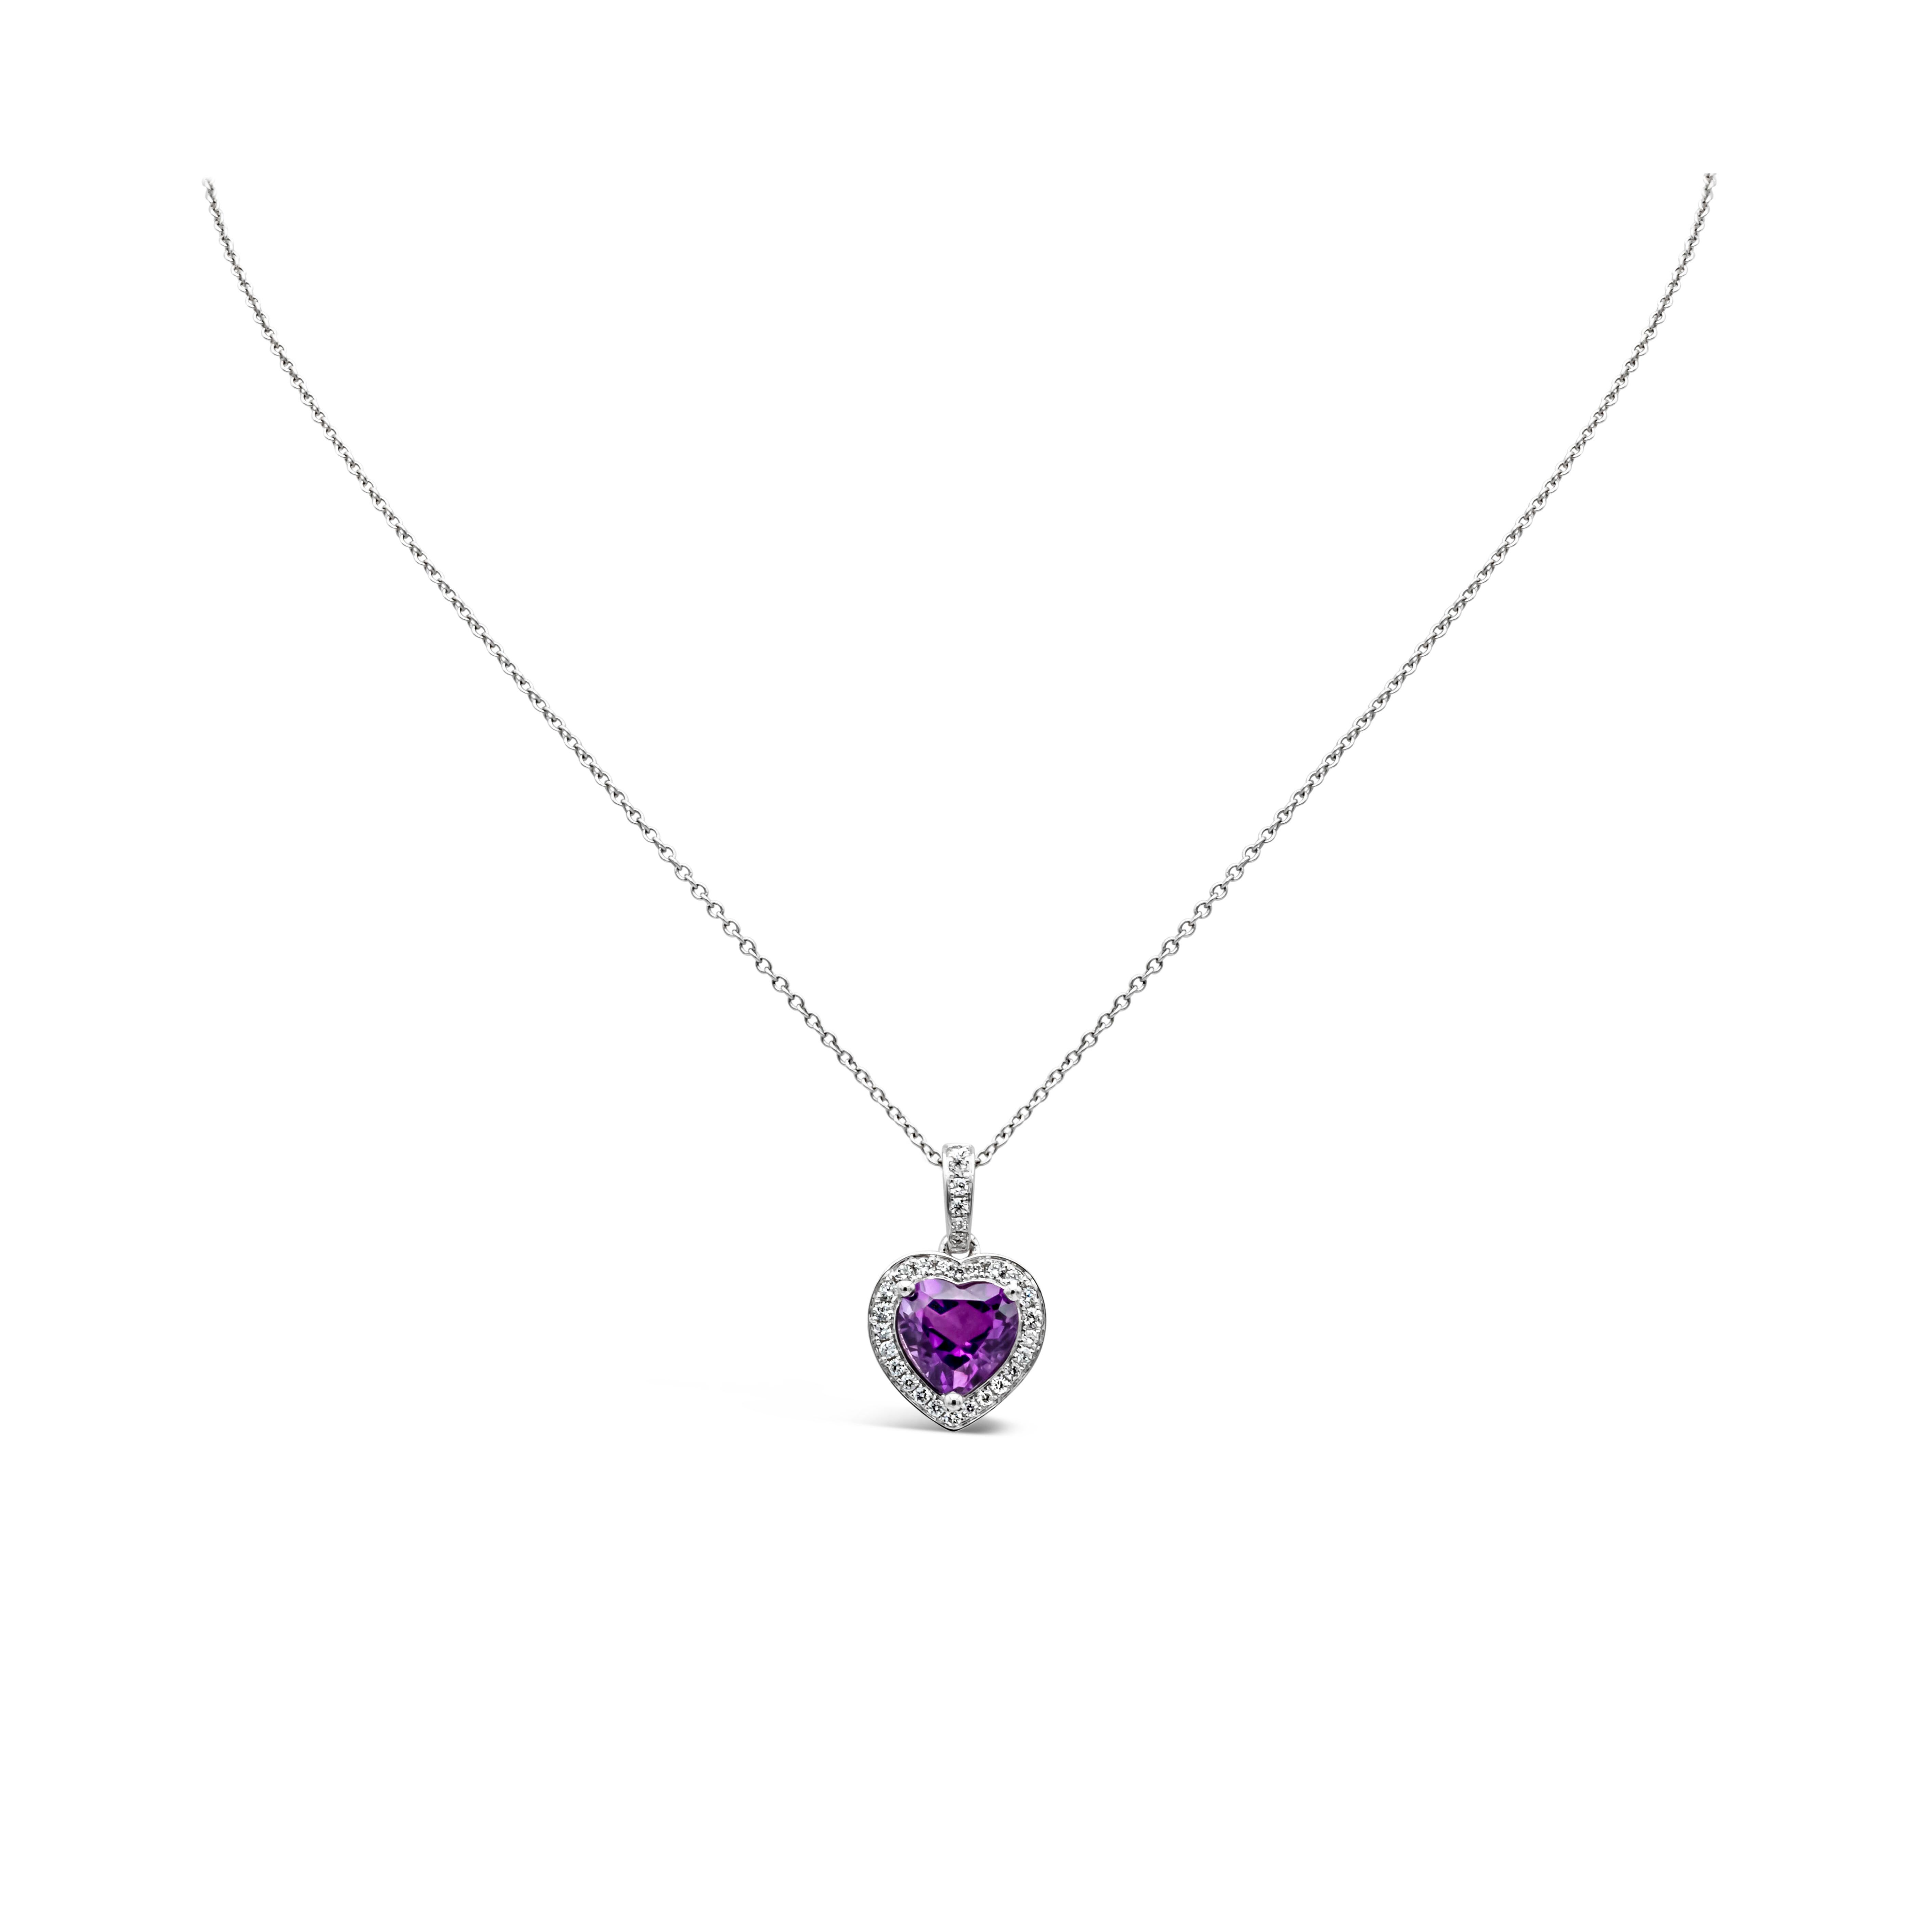 A beautiful and versatile pendant necklace showcasing a vibrant 1.72 carats heart shape purple amethyst in the center, set in a classic three prong setting. Surrounded by a single row round brilliant diamonds and hanging by a diamond encrusted bail